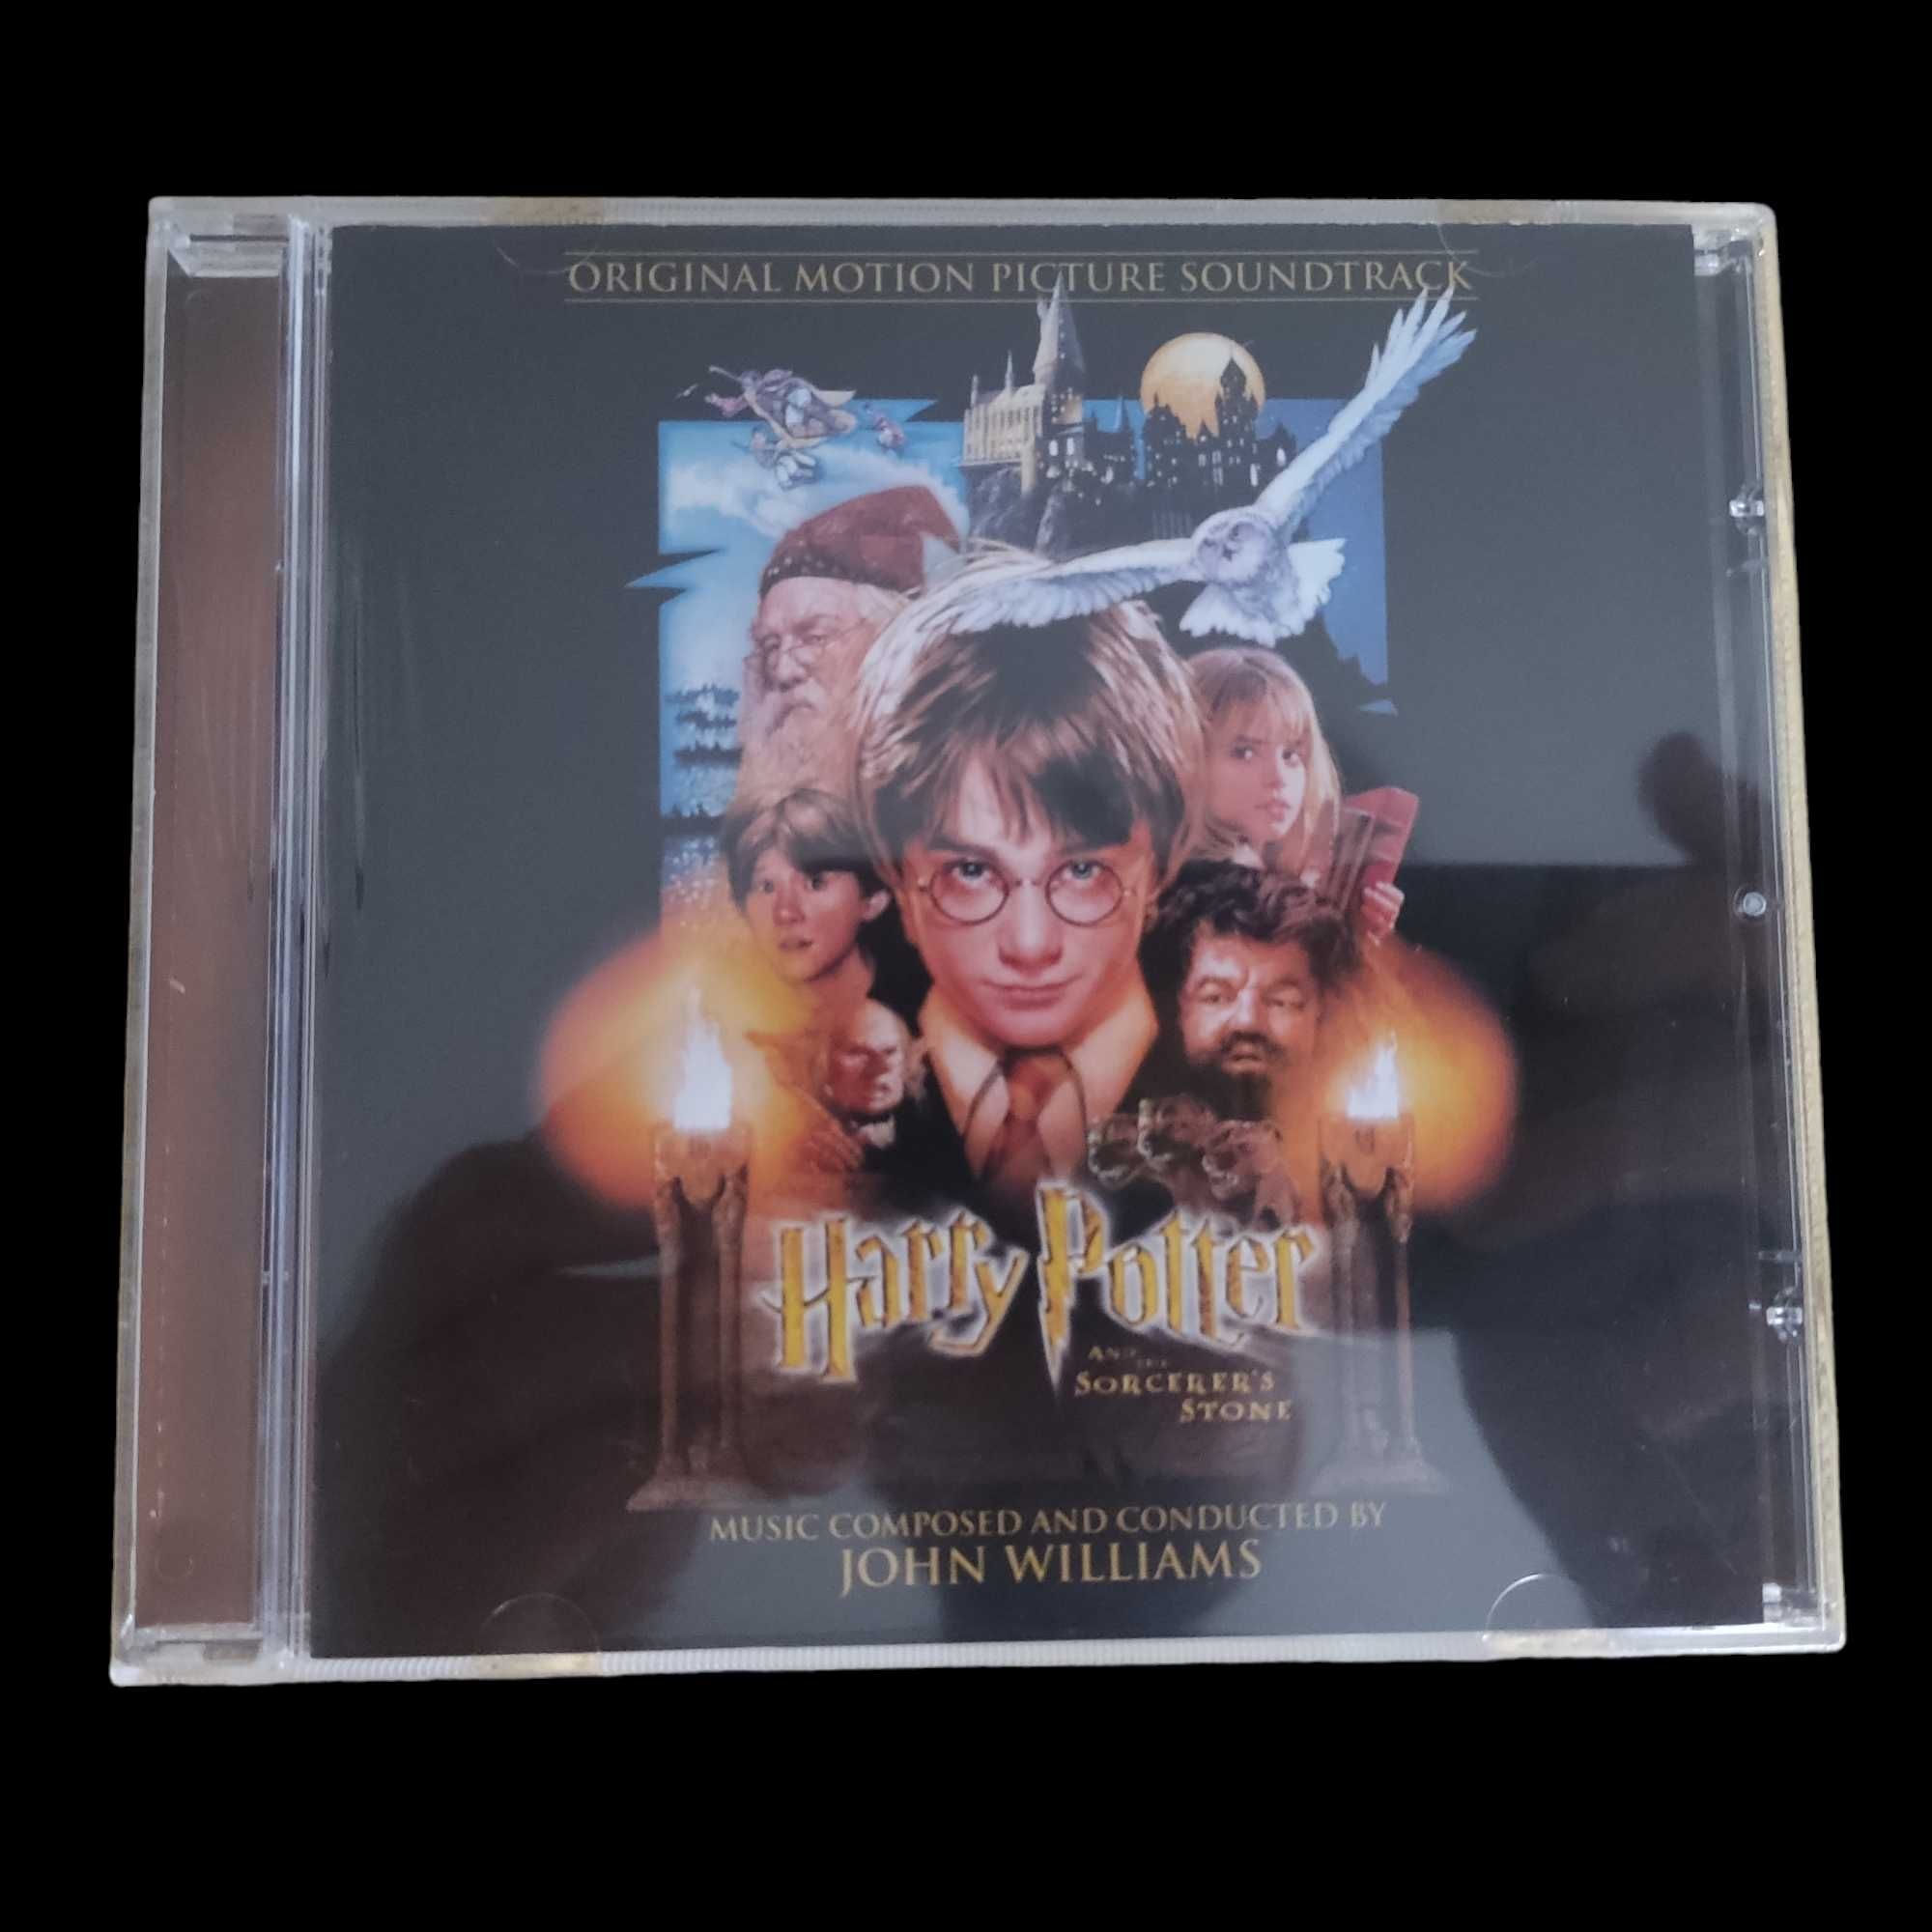 Harry Potter and The Sorcerer's Stone - Original Motion Picture Sound